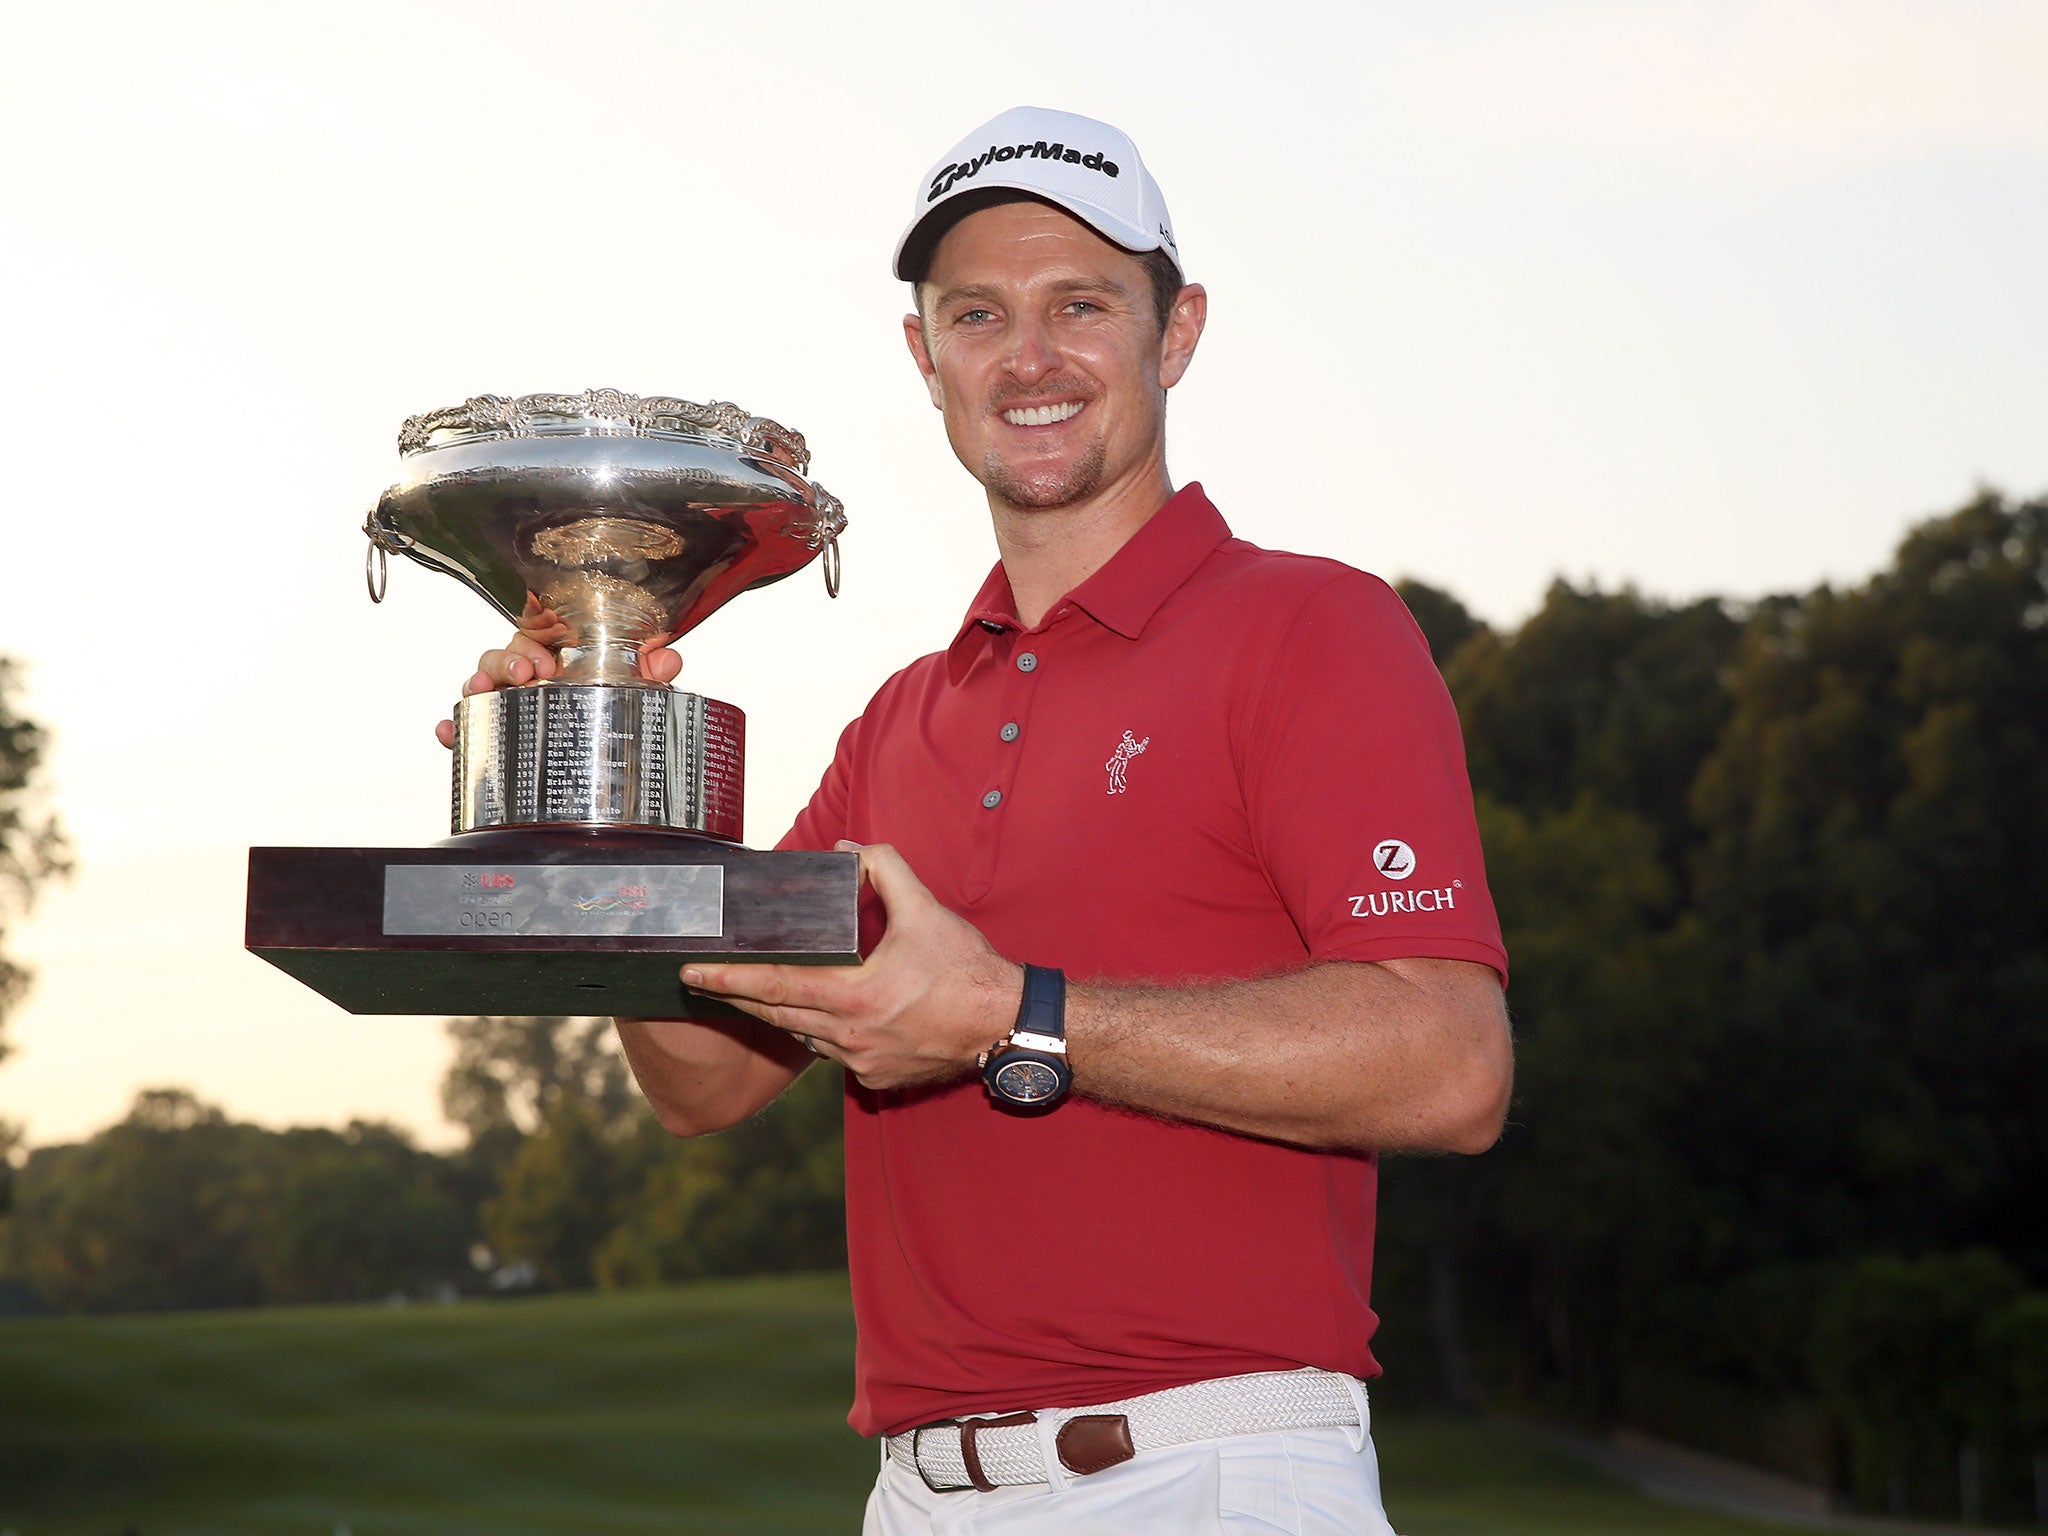 Justin Rose won the Hong Kong Open by one shot